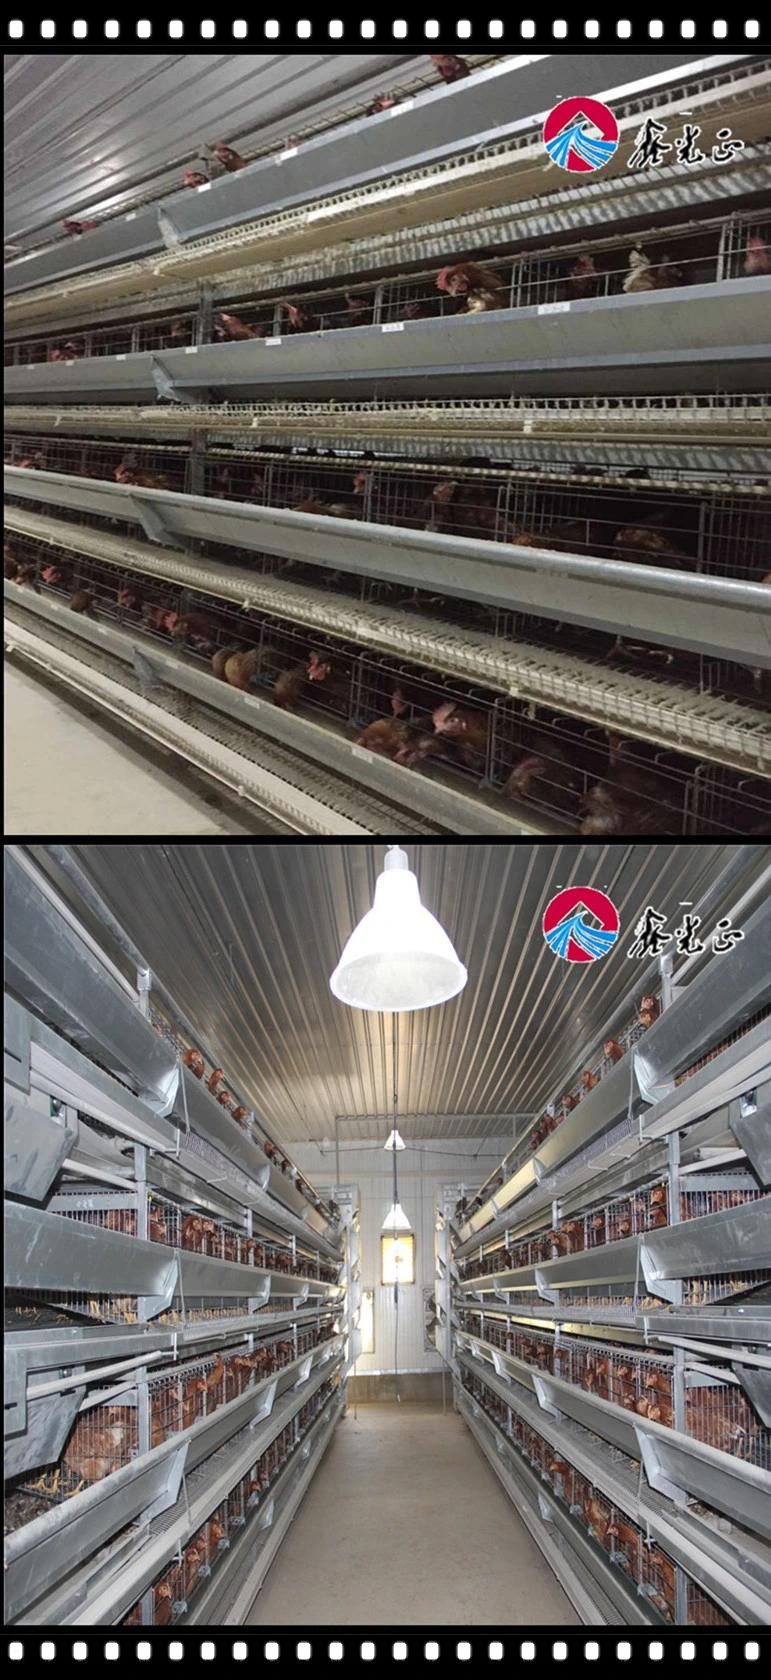 Layer Cage System Broiler Poultry Farm Equipment